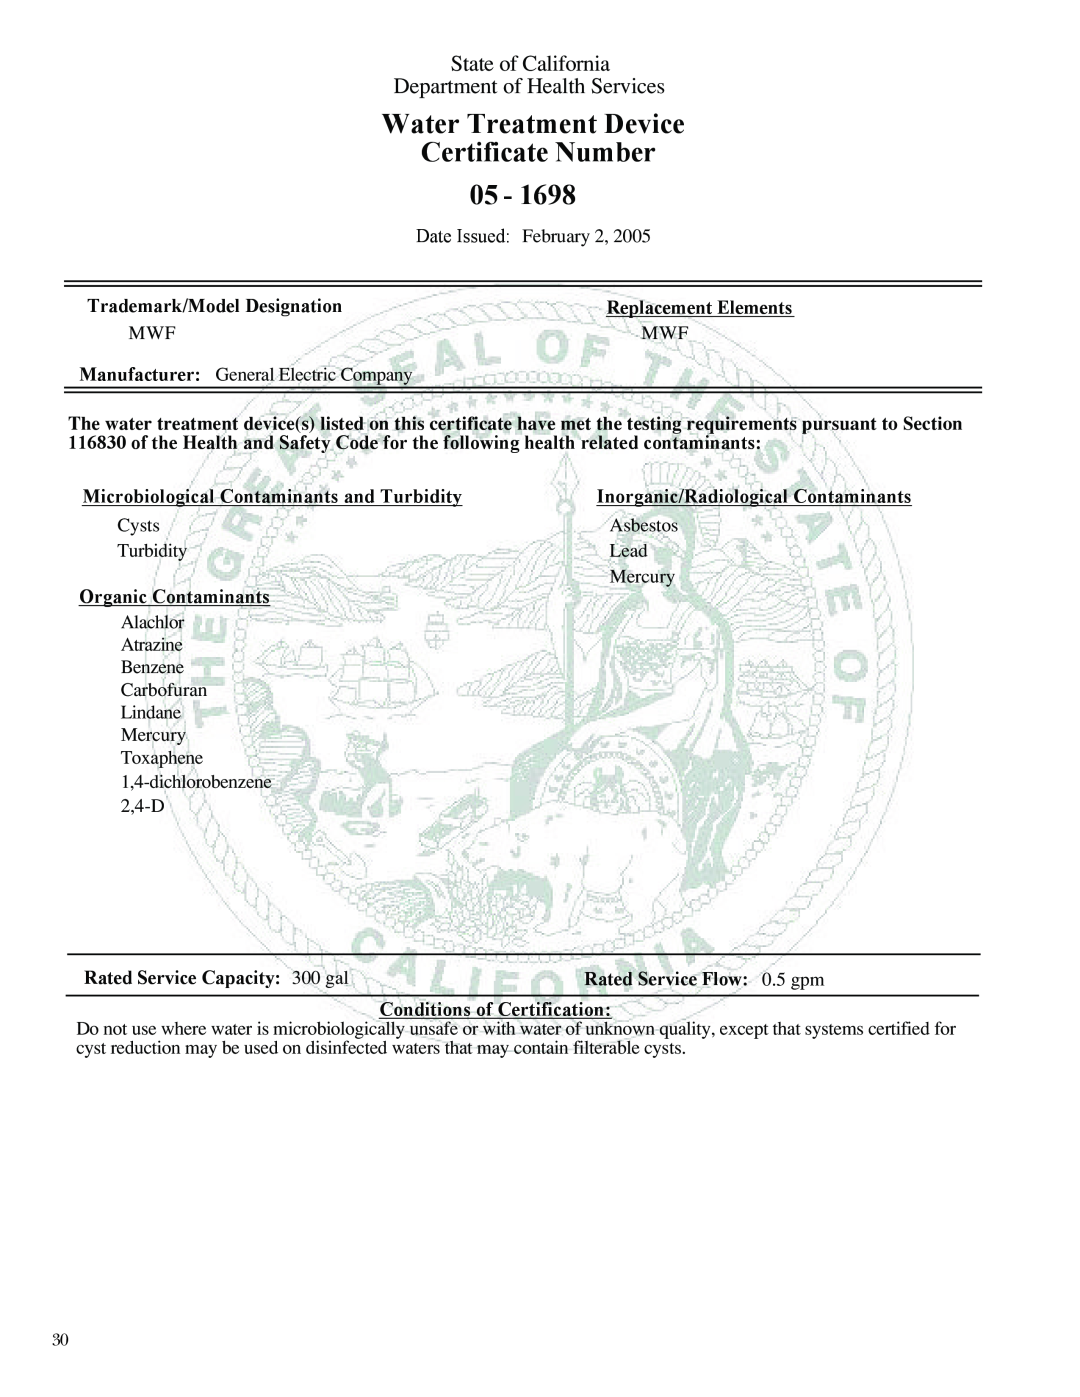 GE Monogram 42, 48 Certificate Number, Water Treatment Device, State of California, Department of Health Services 